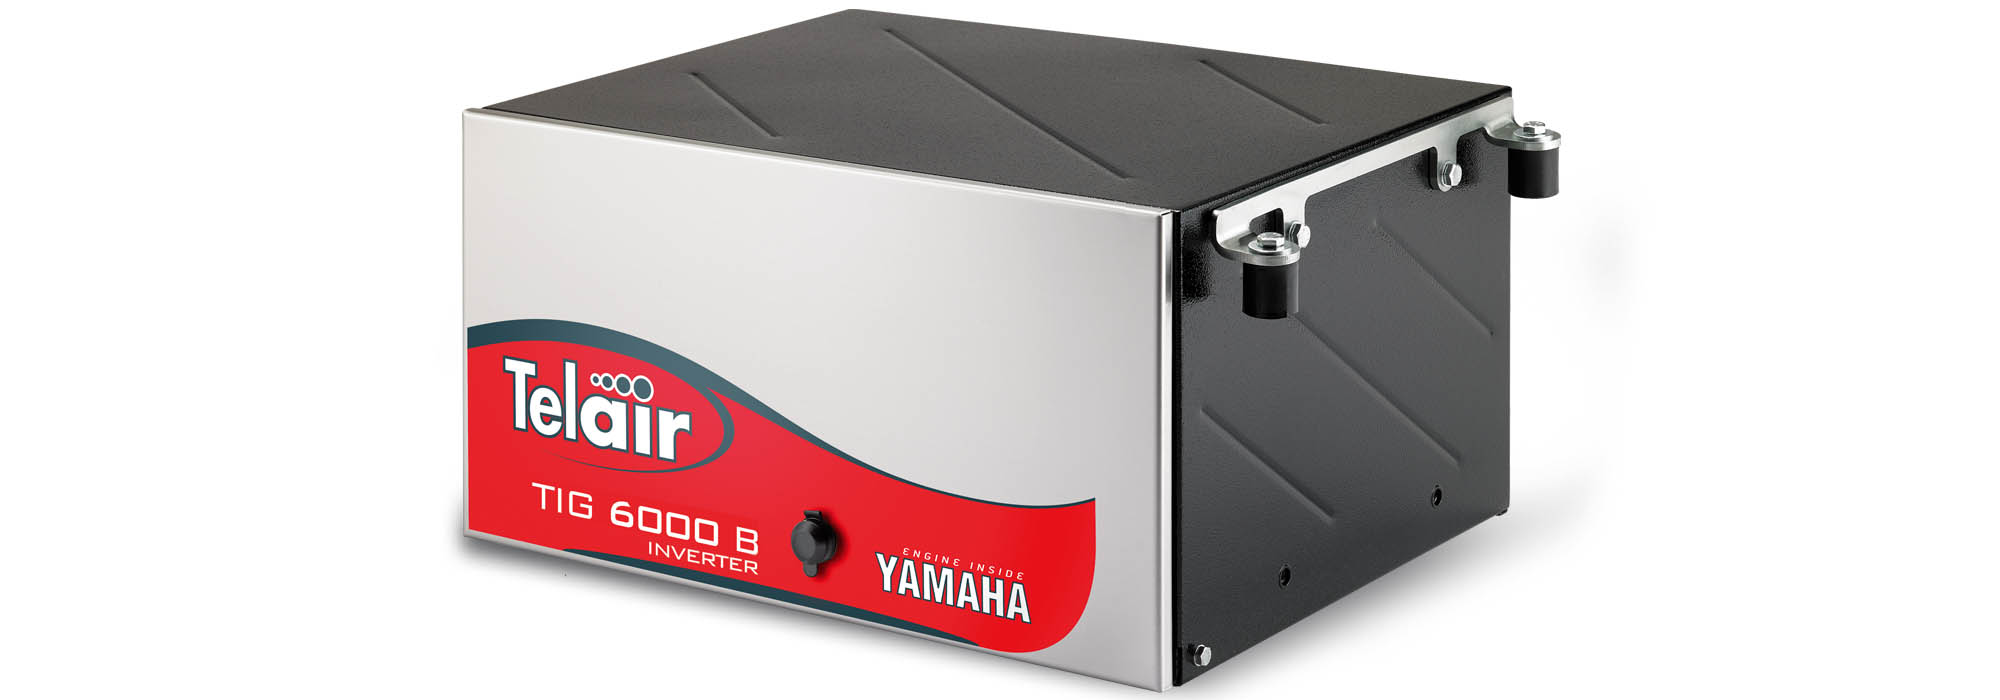 TIG 6000 B inverter generator: loads of power with low consumption